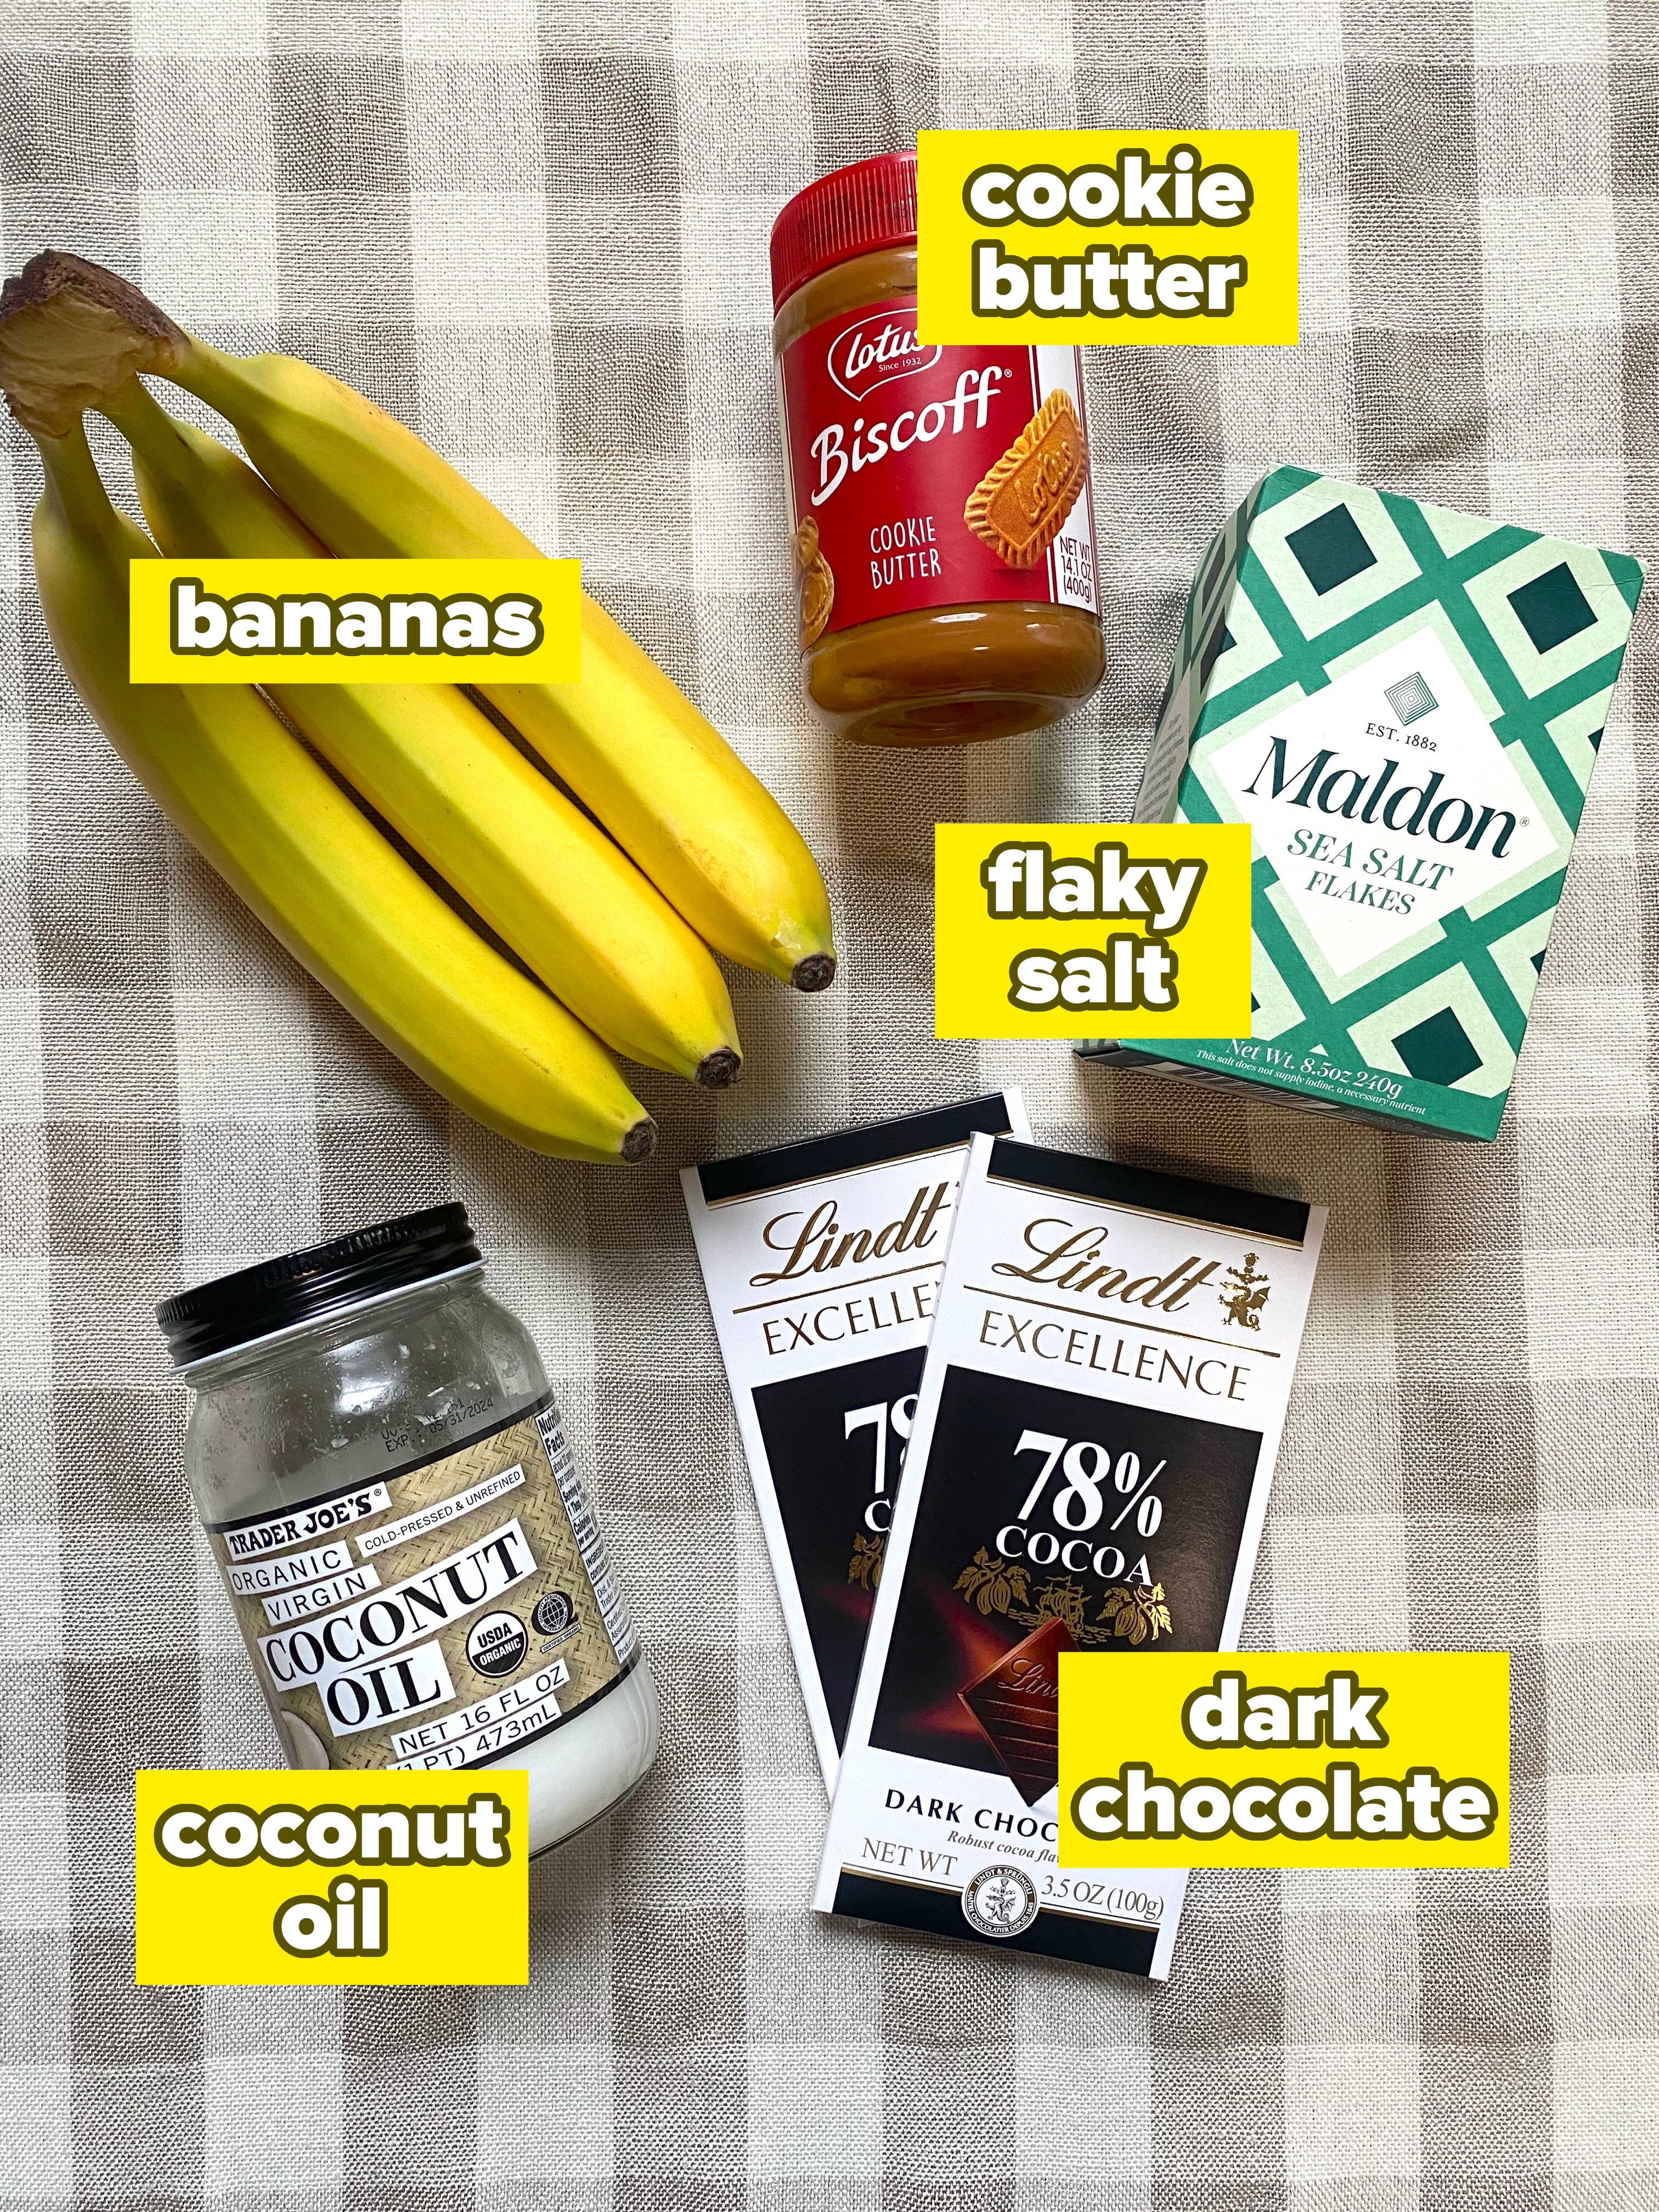 Ingredients for banana, cookie butter, and chocolate bark on a table